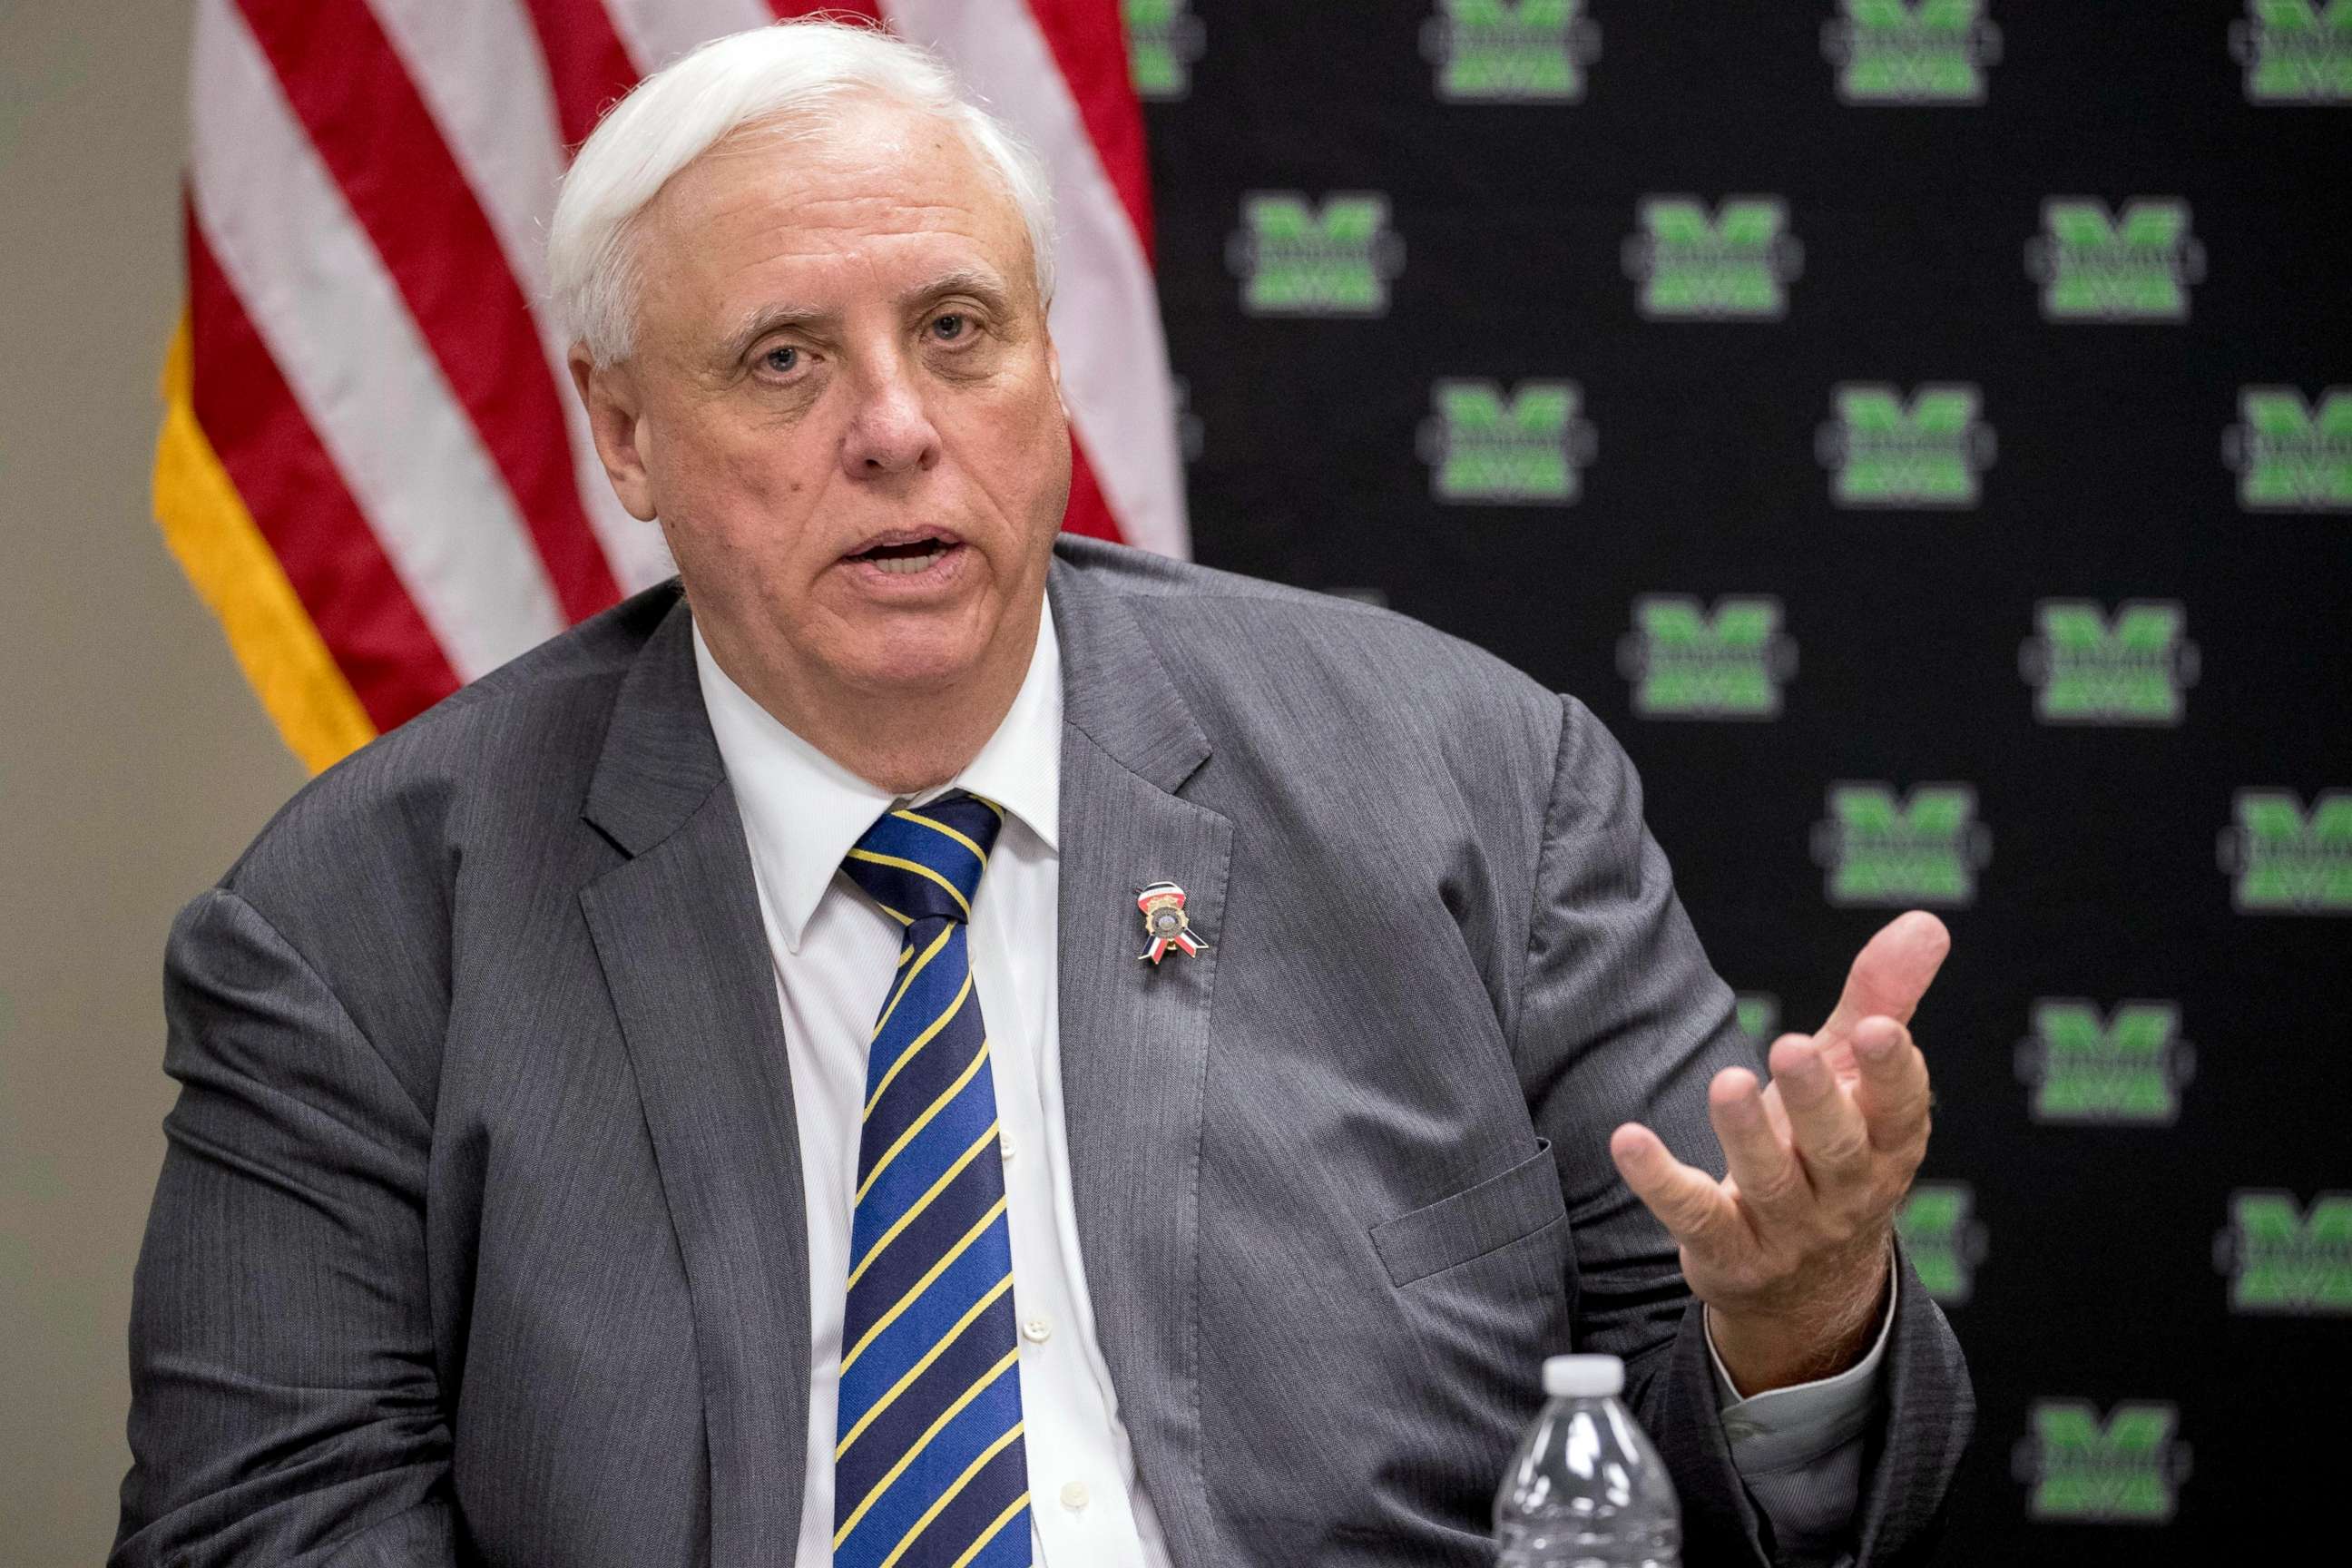 PHOTO: West Virginia Gov. Jim Justice speaks at a roundtable in Huntington, W.Va., July 8, 2019.